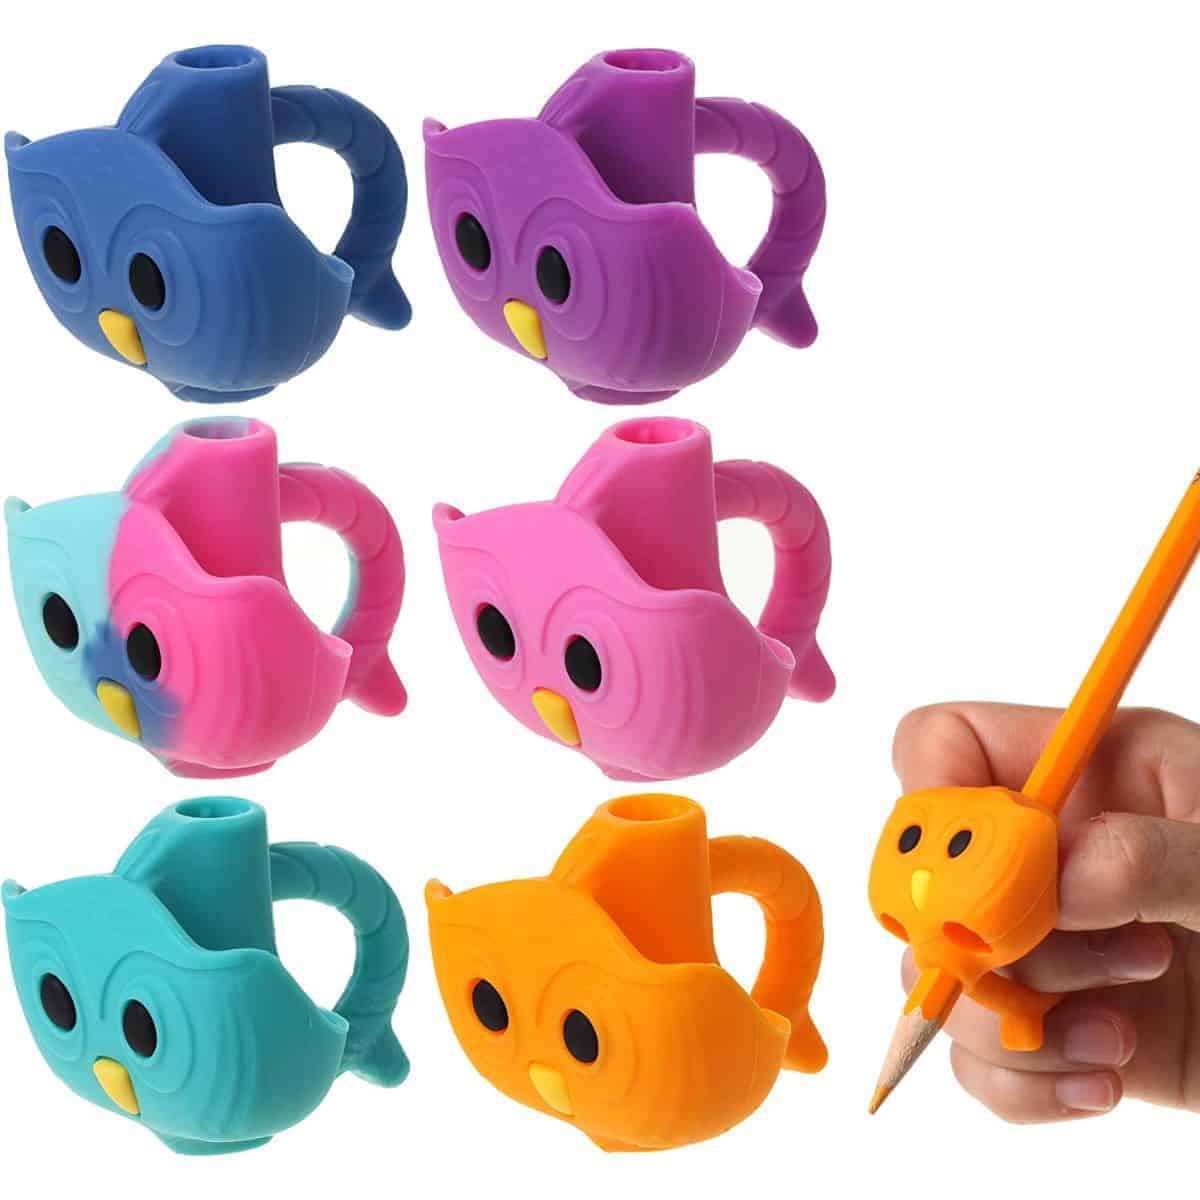 Help kids pencil grasp and handwriting with the 7 best pencil grips that are perfect for school and home. Learn which pencil grip is the best one for your kid! 